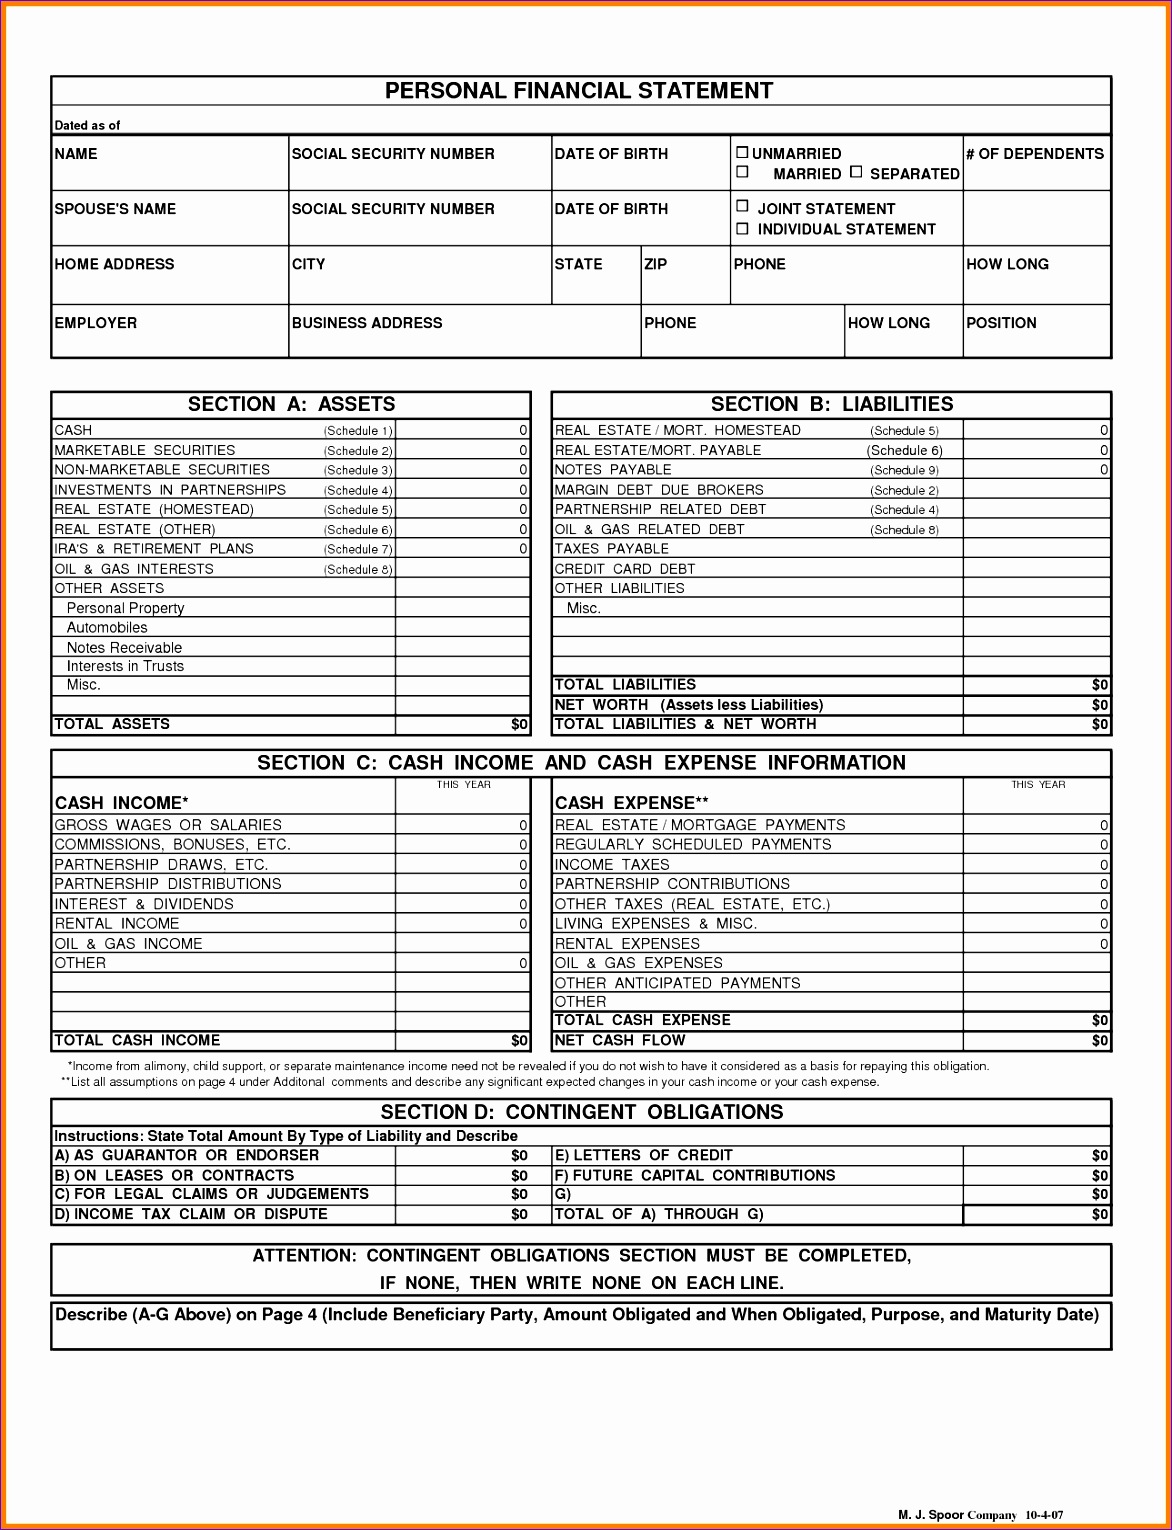 personal financial statements templates personal financial statement template excel zmdstx5b